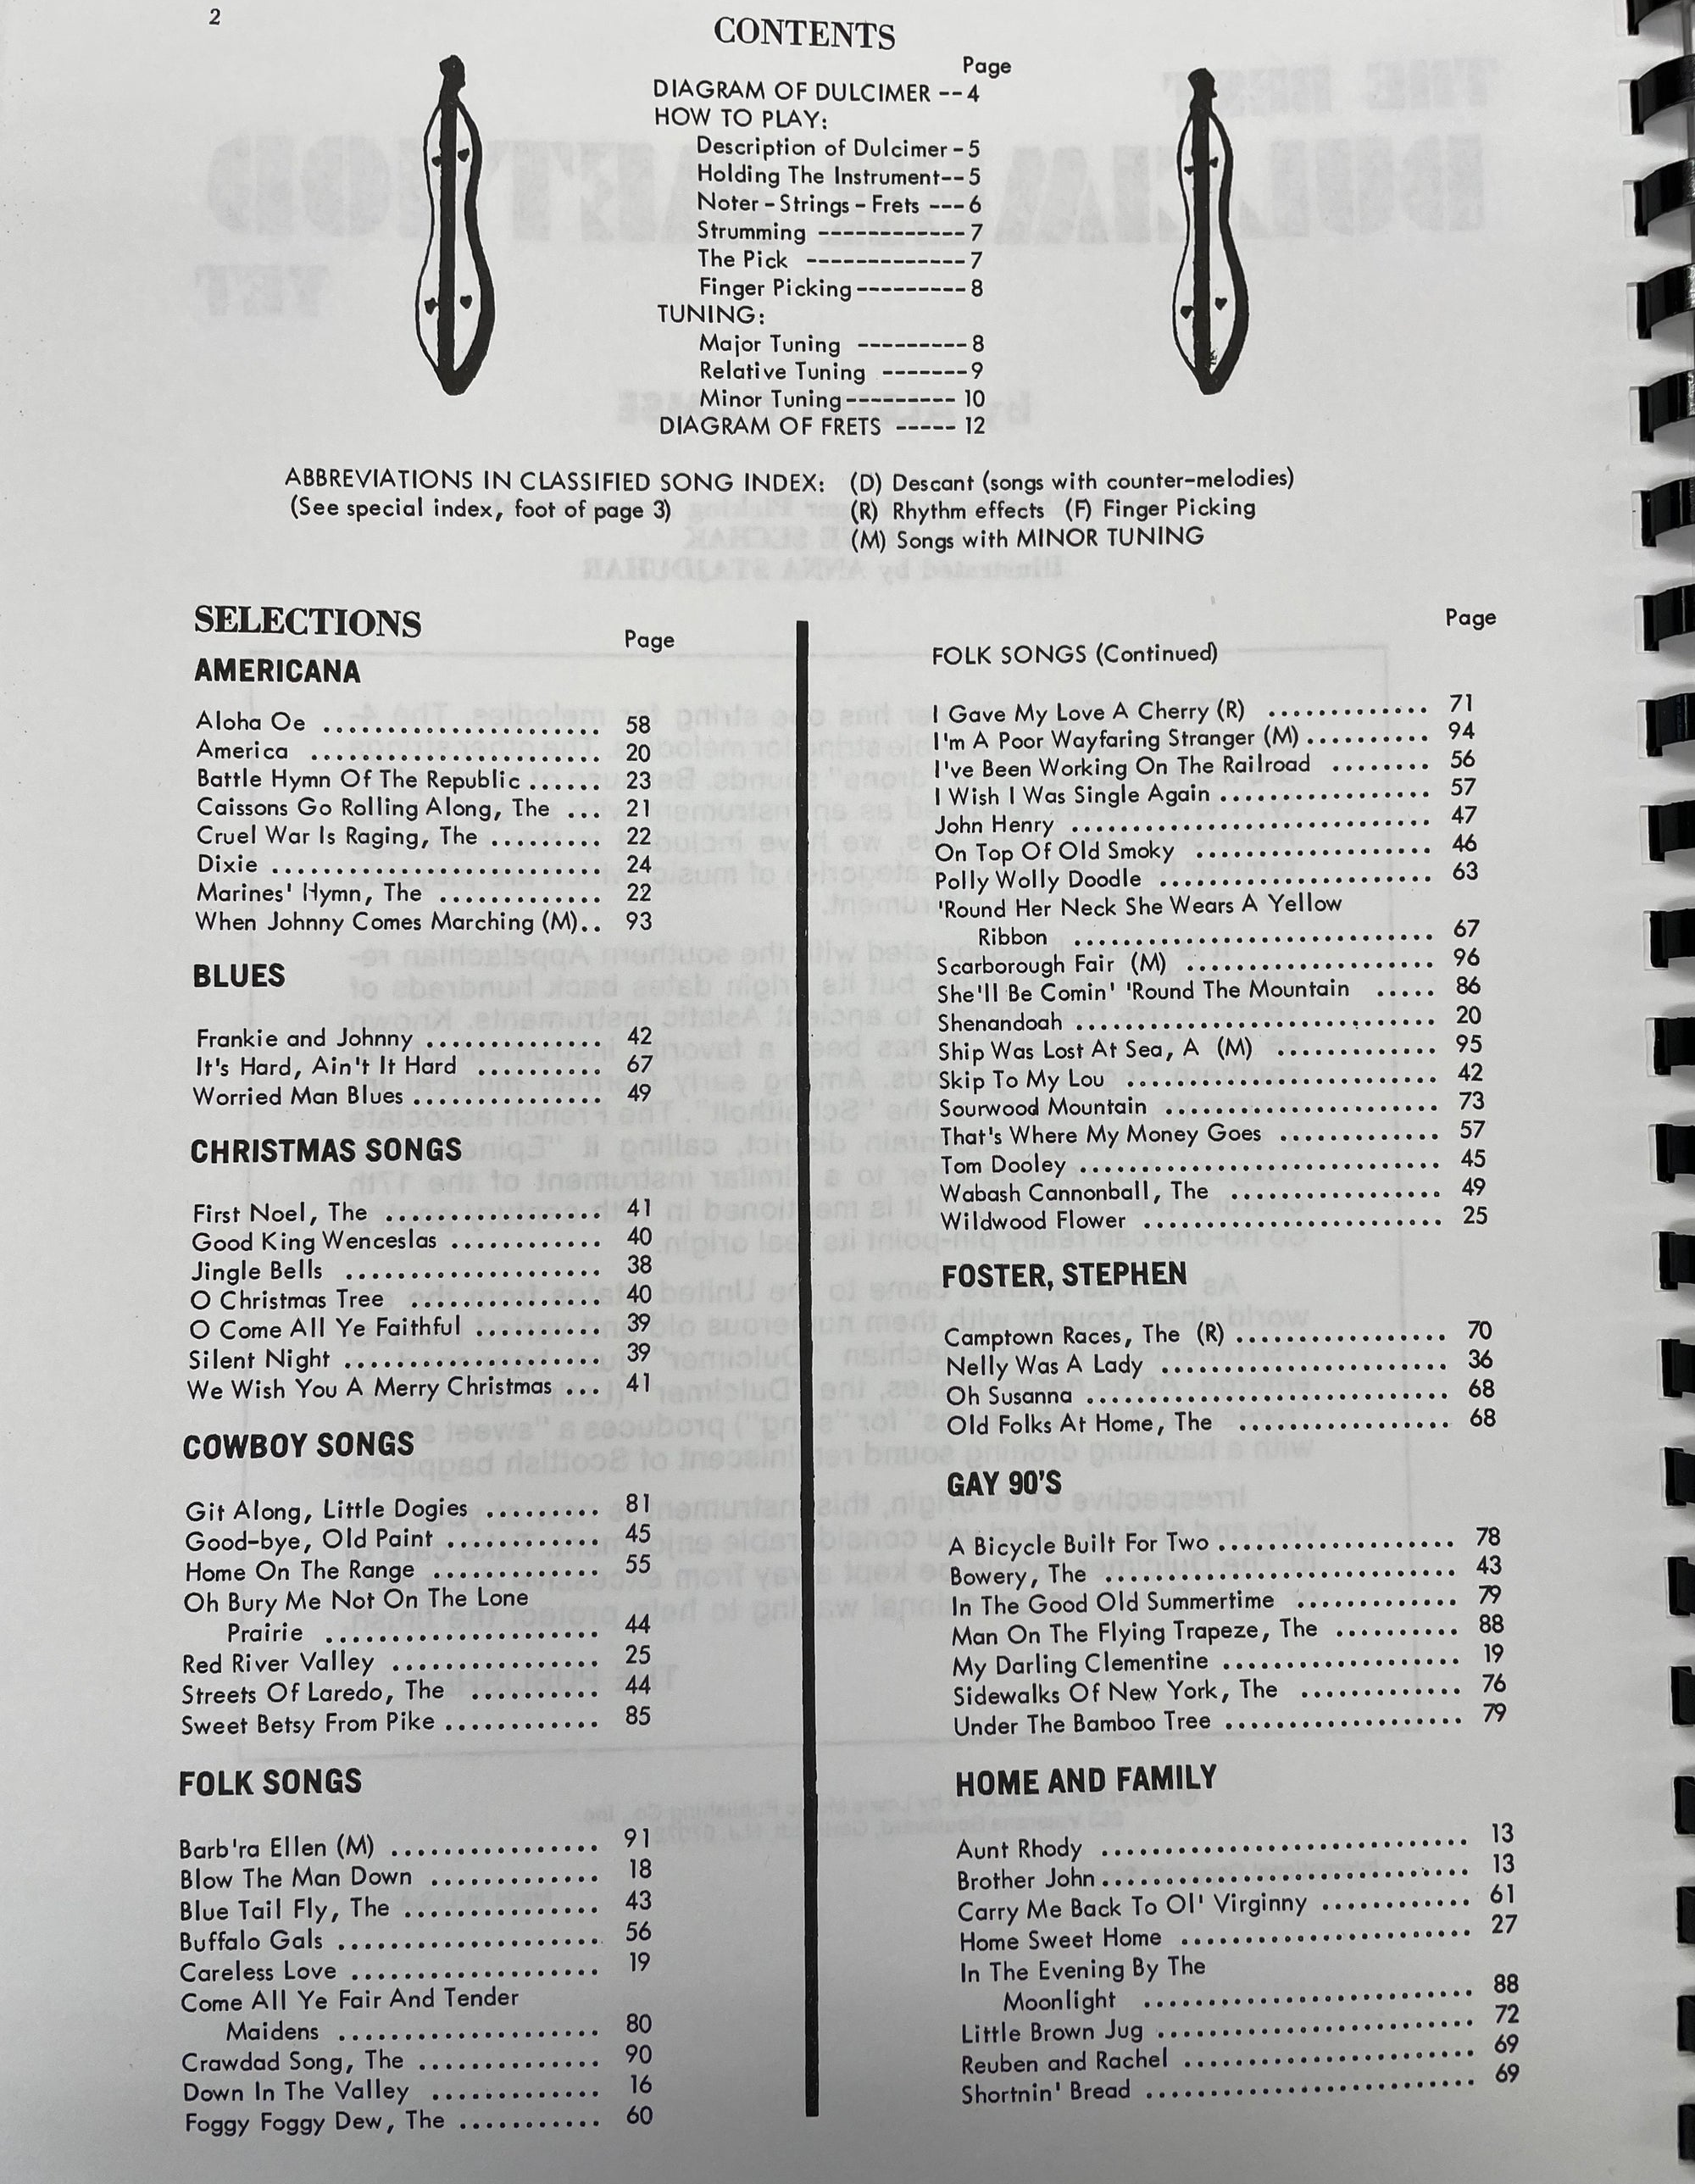 Table of contents from Best Dulcimer Method Yet by Albert Gamse showing titles and page numbers, divided into sections such as "songs with guitar chords in D-A-D tuning" and "foster songs.